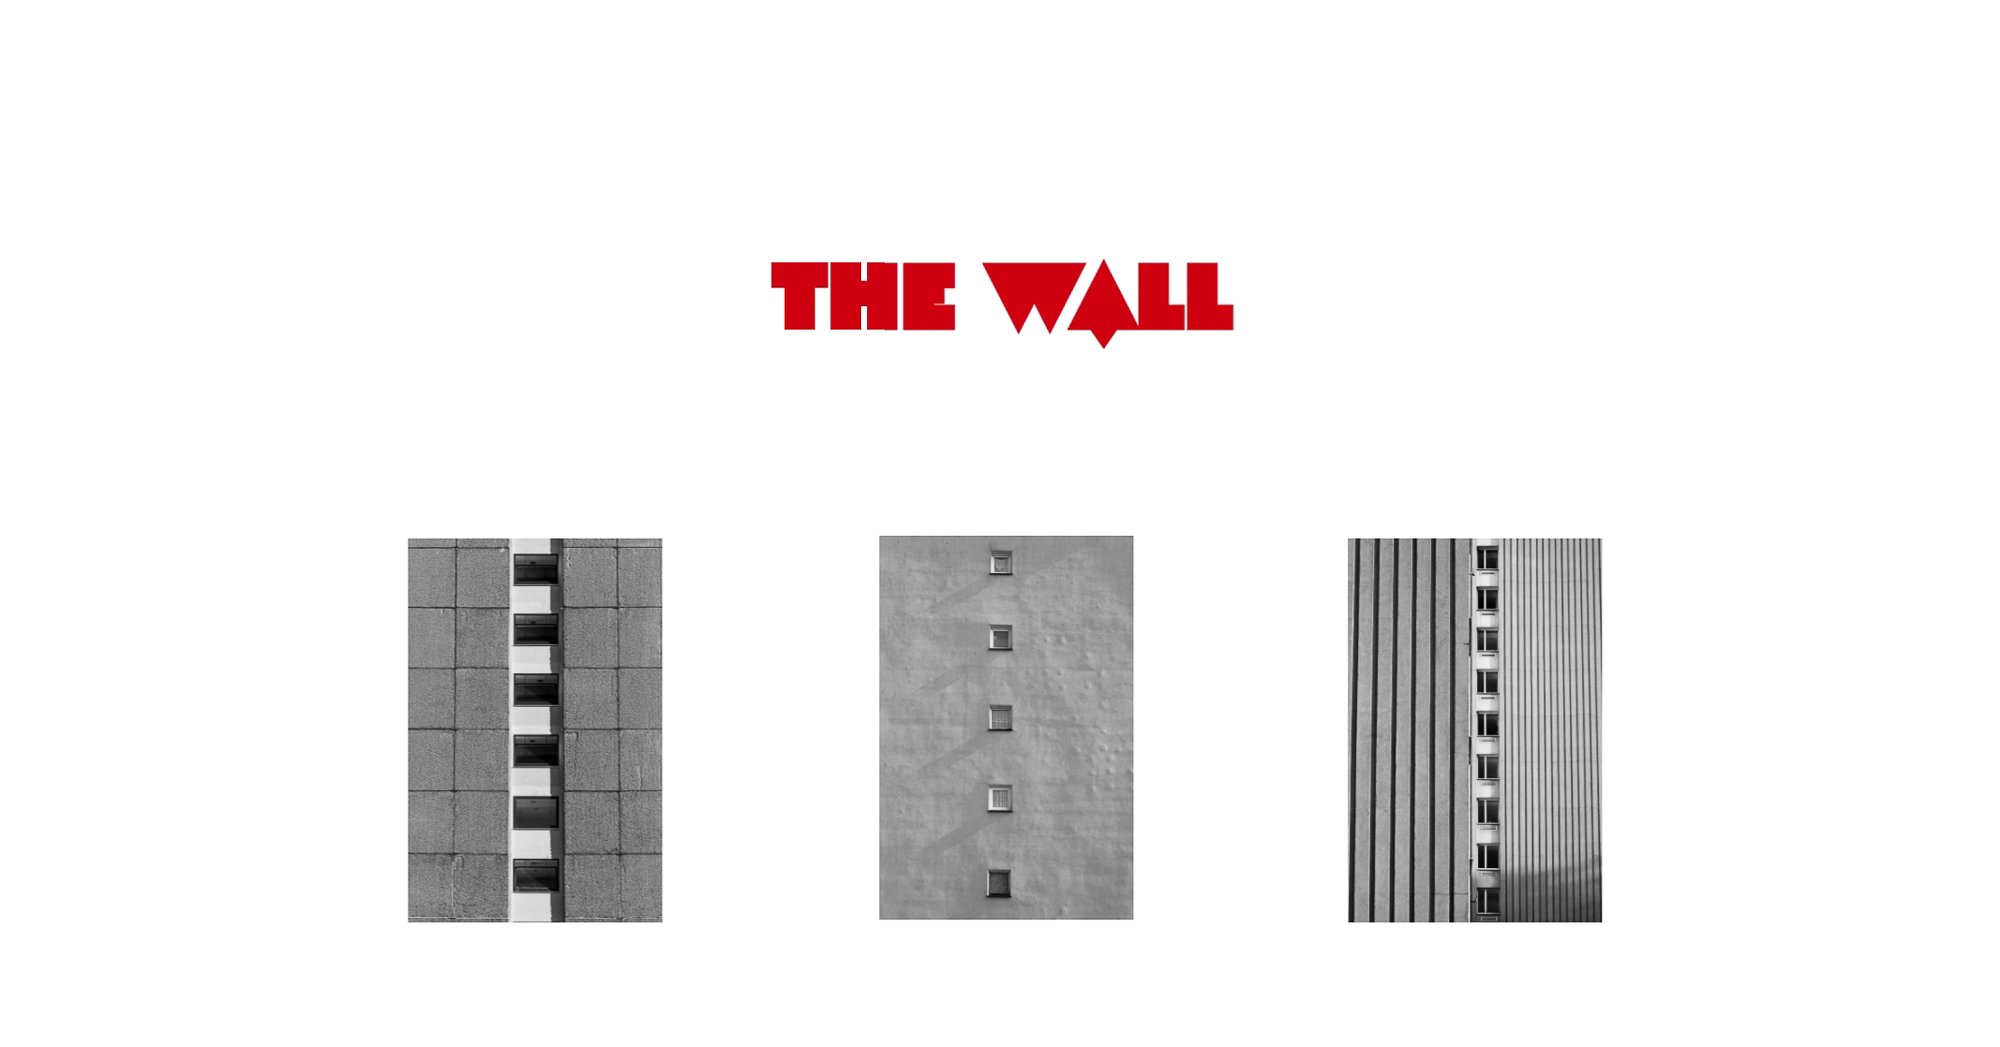 Adam Mazek Photography Warsaw (Warszawa) 2019. Poster of the photography exhibition - The Wall. Poster. Mur. Facebook preview.